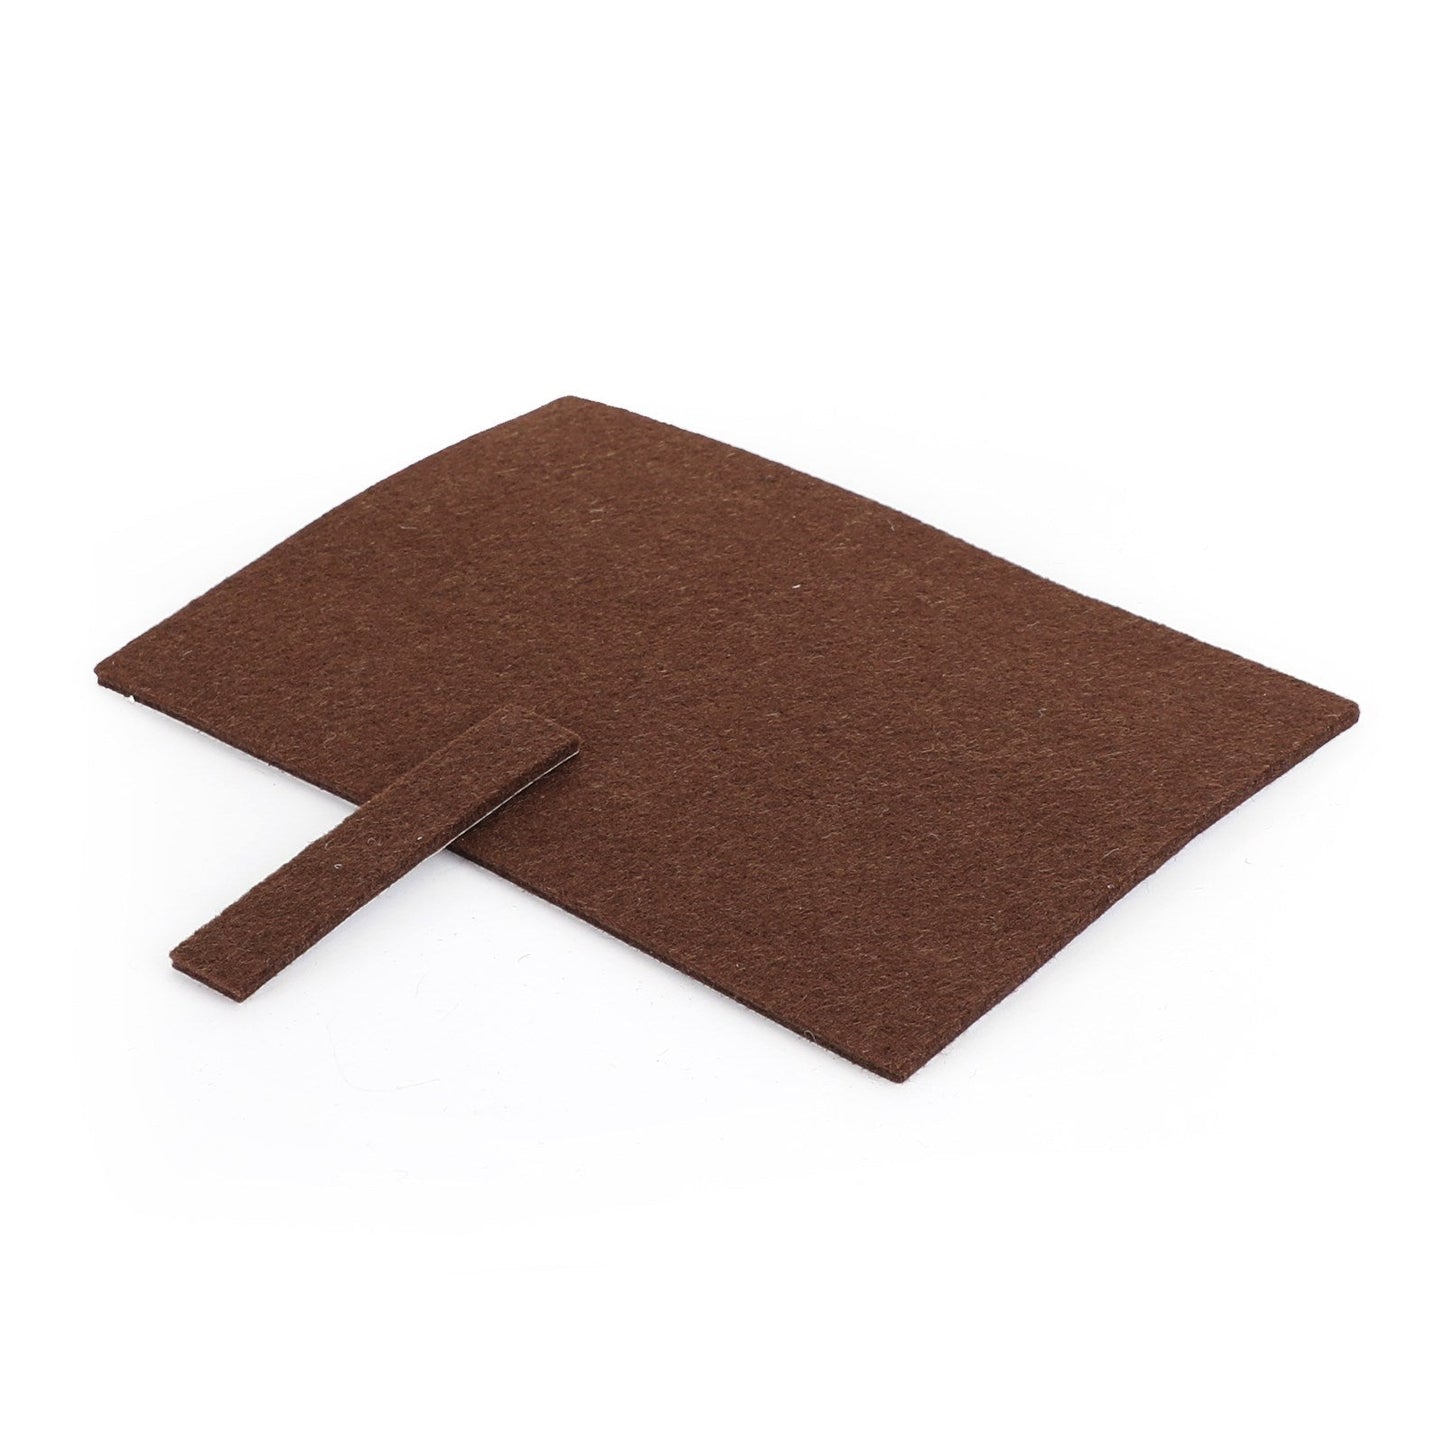 357 Piece Self-Stick Furniture Felt Pads for Hard Surfaces Brown